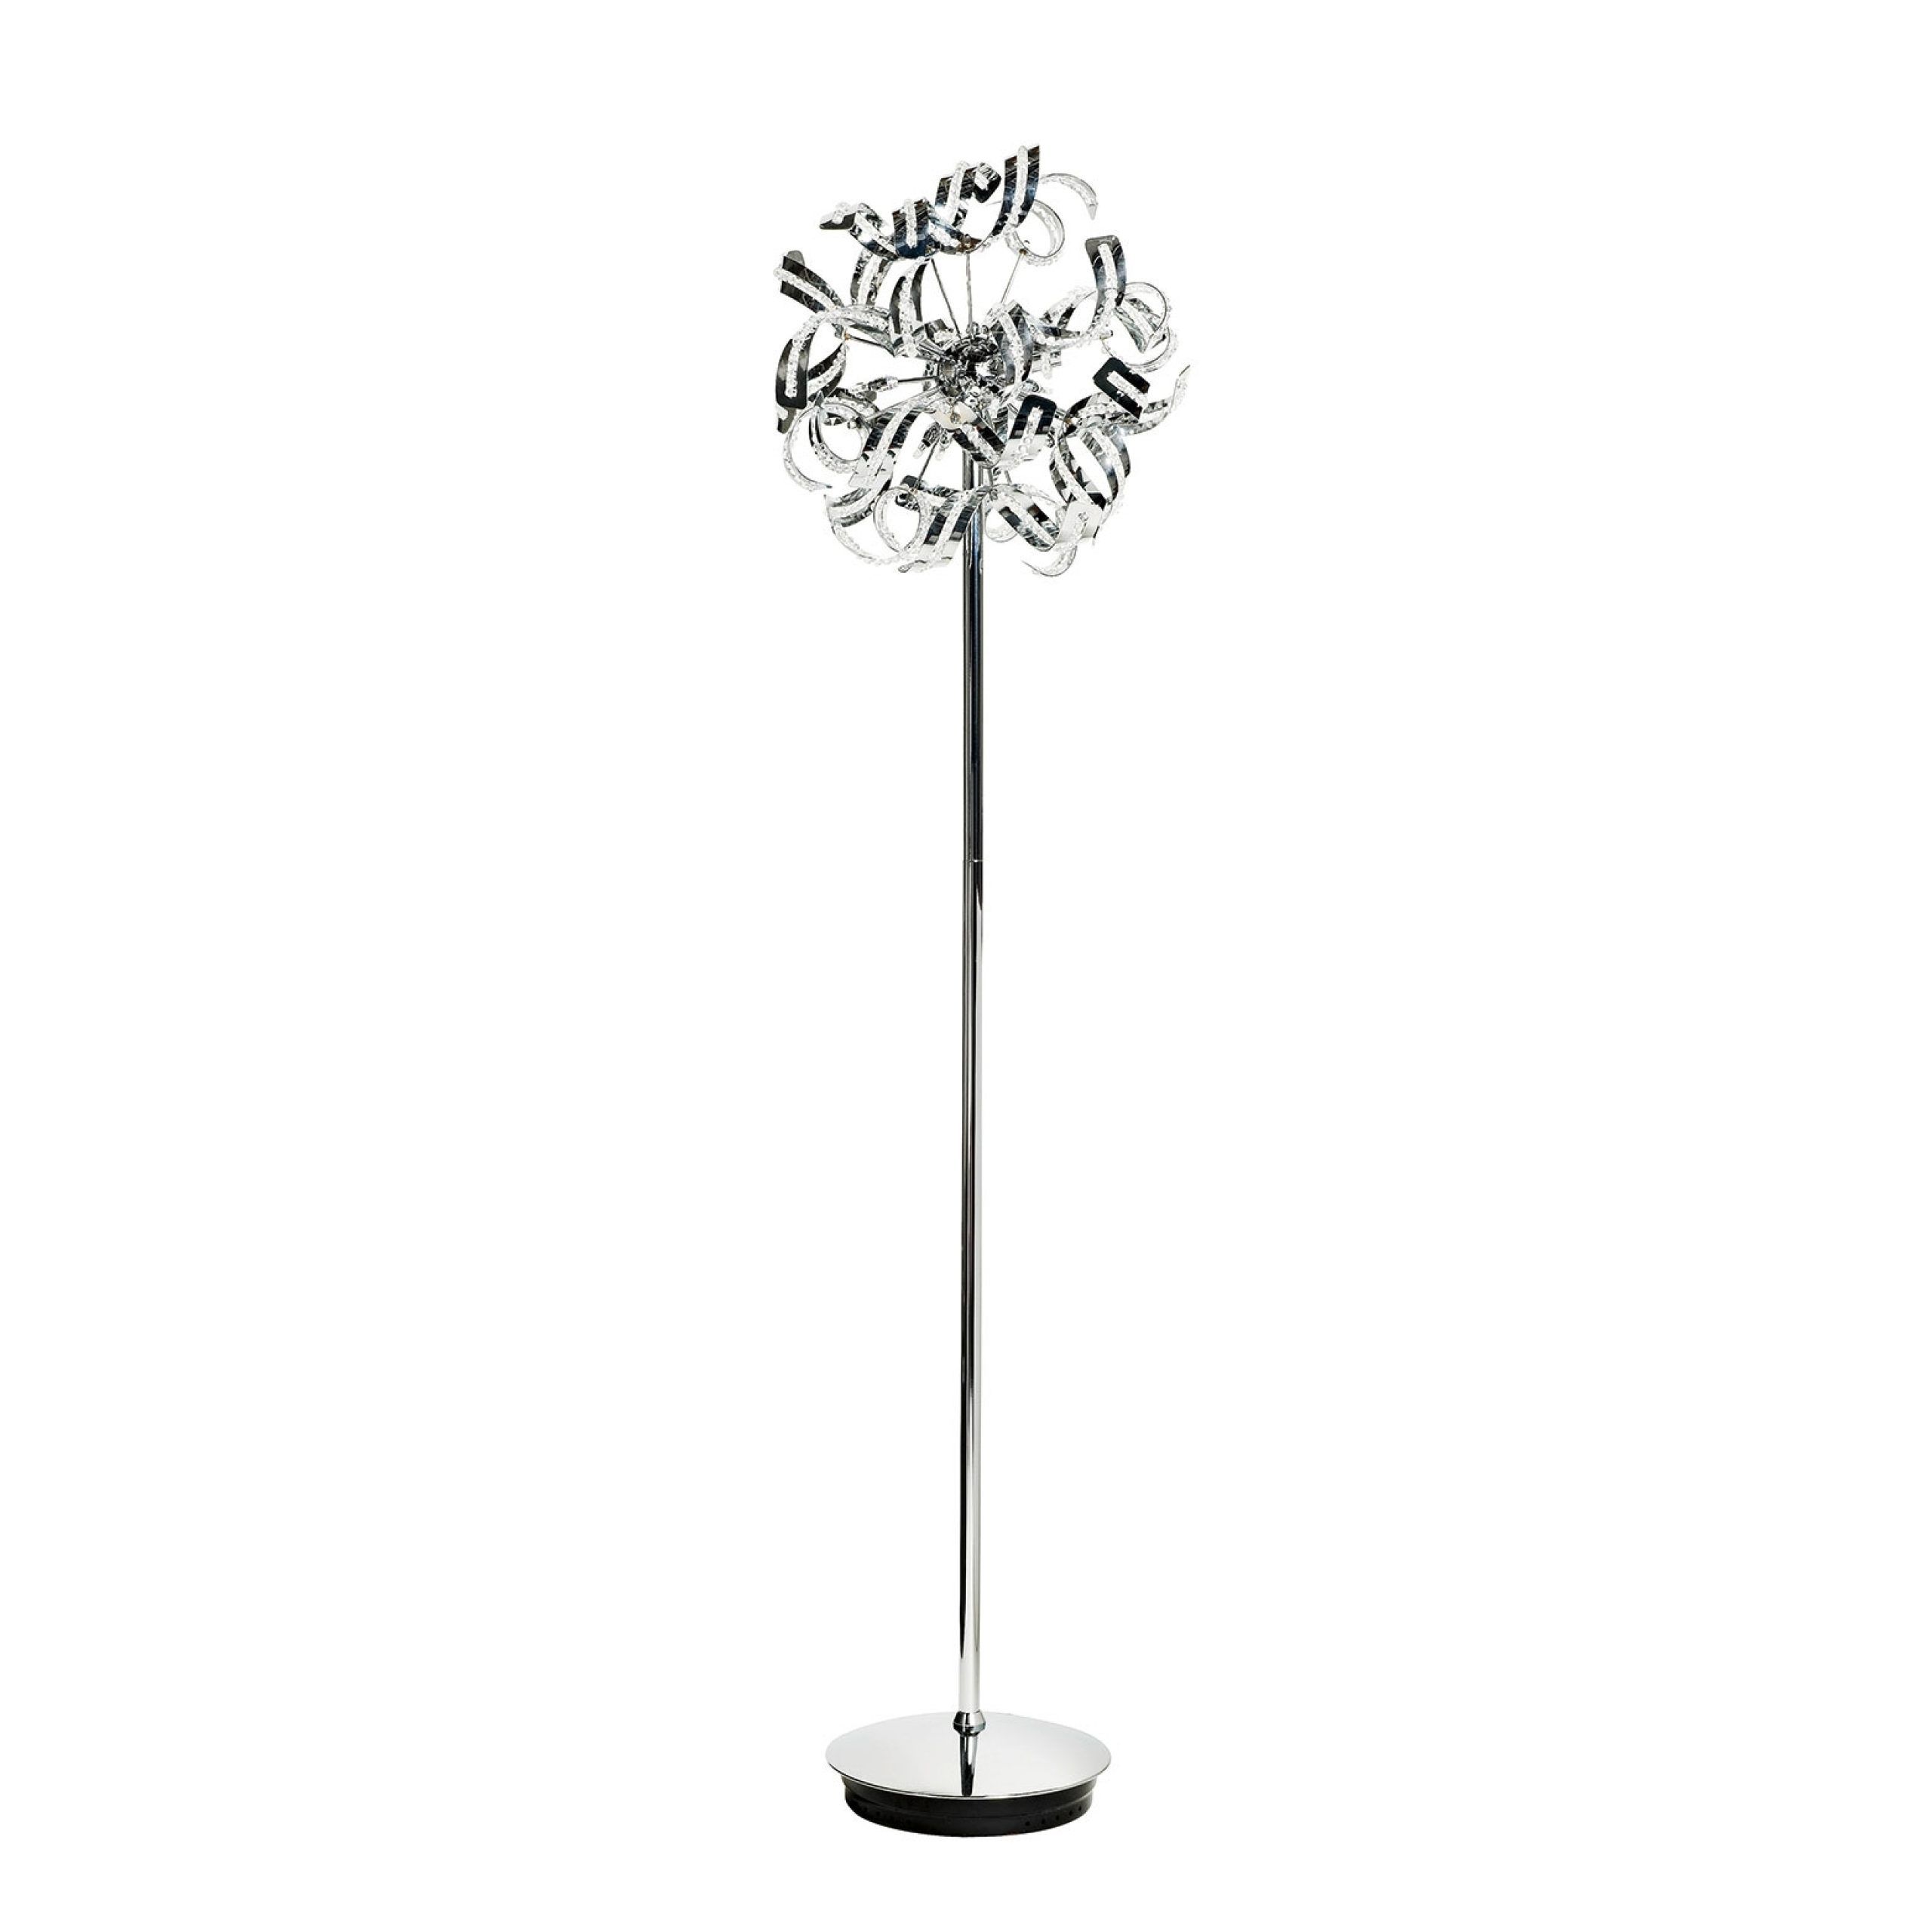 Buy Macey Chrome Crystal Floor Lamp | Harvey Norman Au Pertaining To Chrome Crystal Tower Floor Lamps (View 10 of 15)